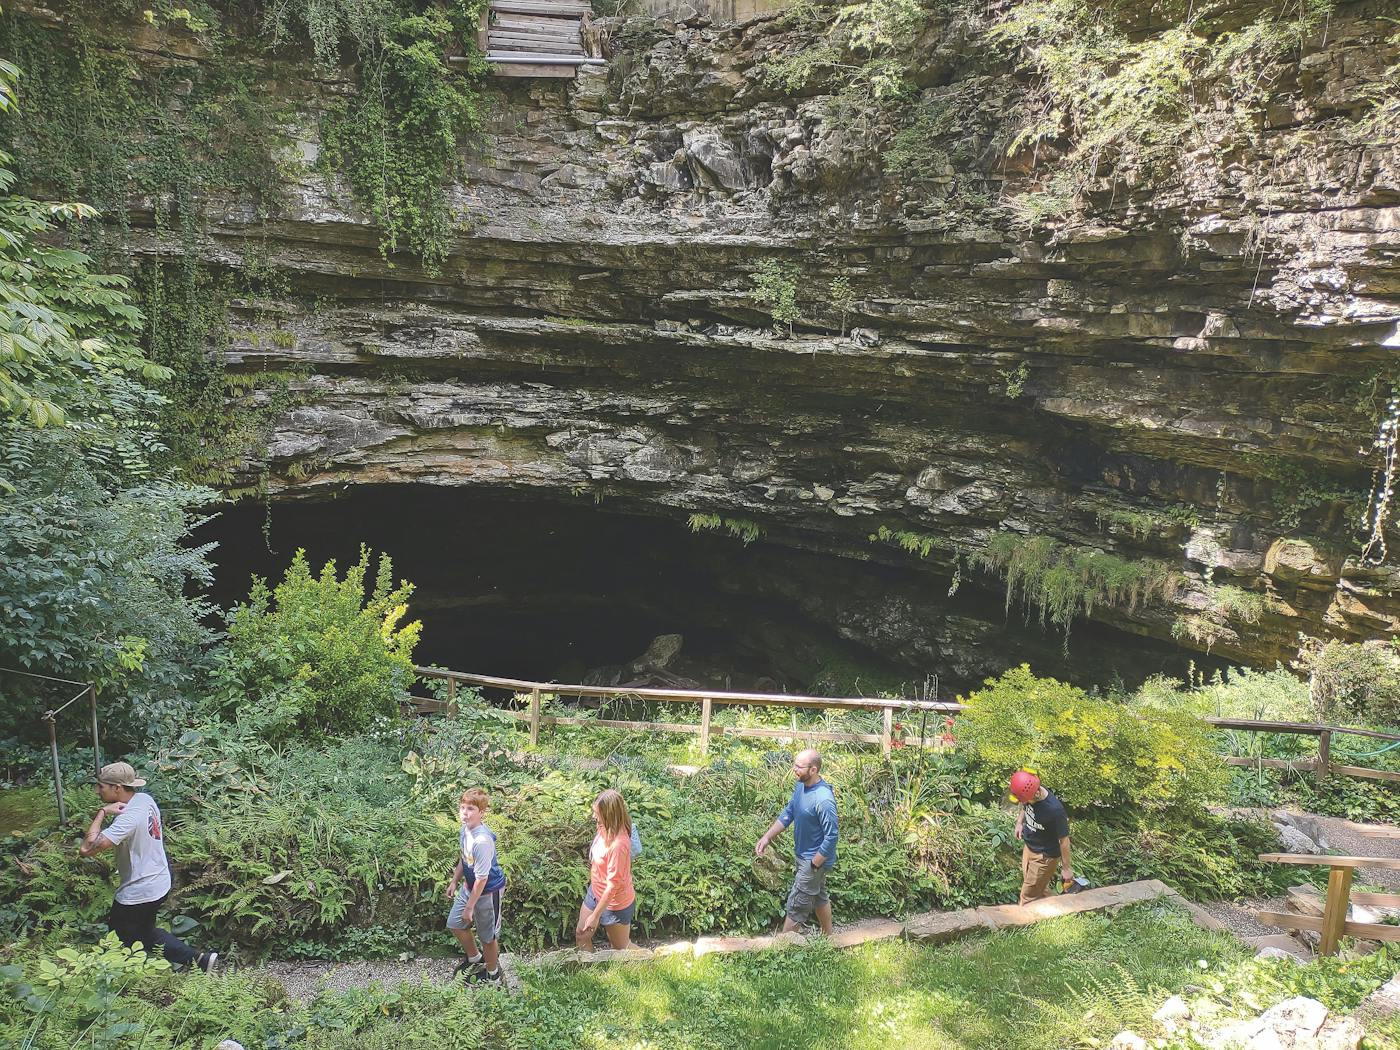 People walking out of Hidden River Cave entrance in Horse Cave, Kentucky (photo courtesy of Hidden River Cave))